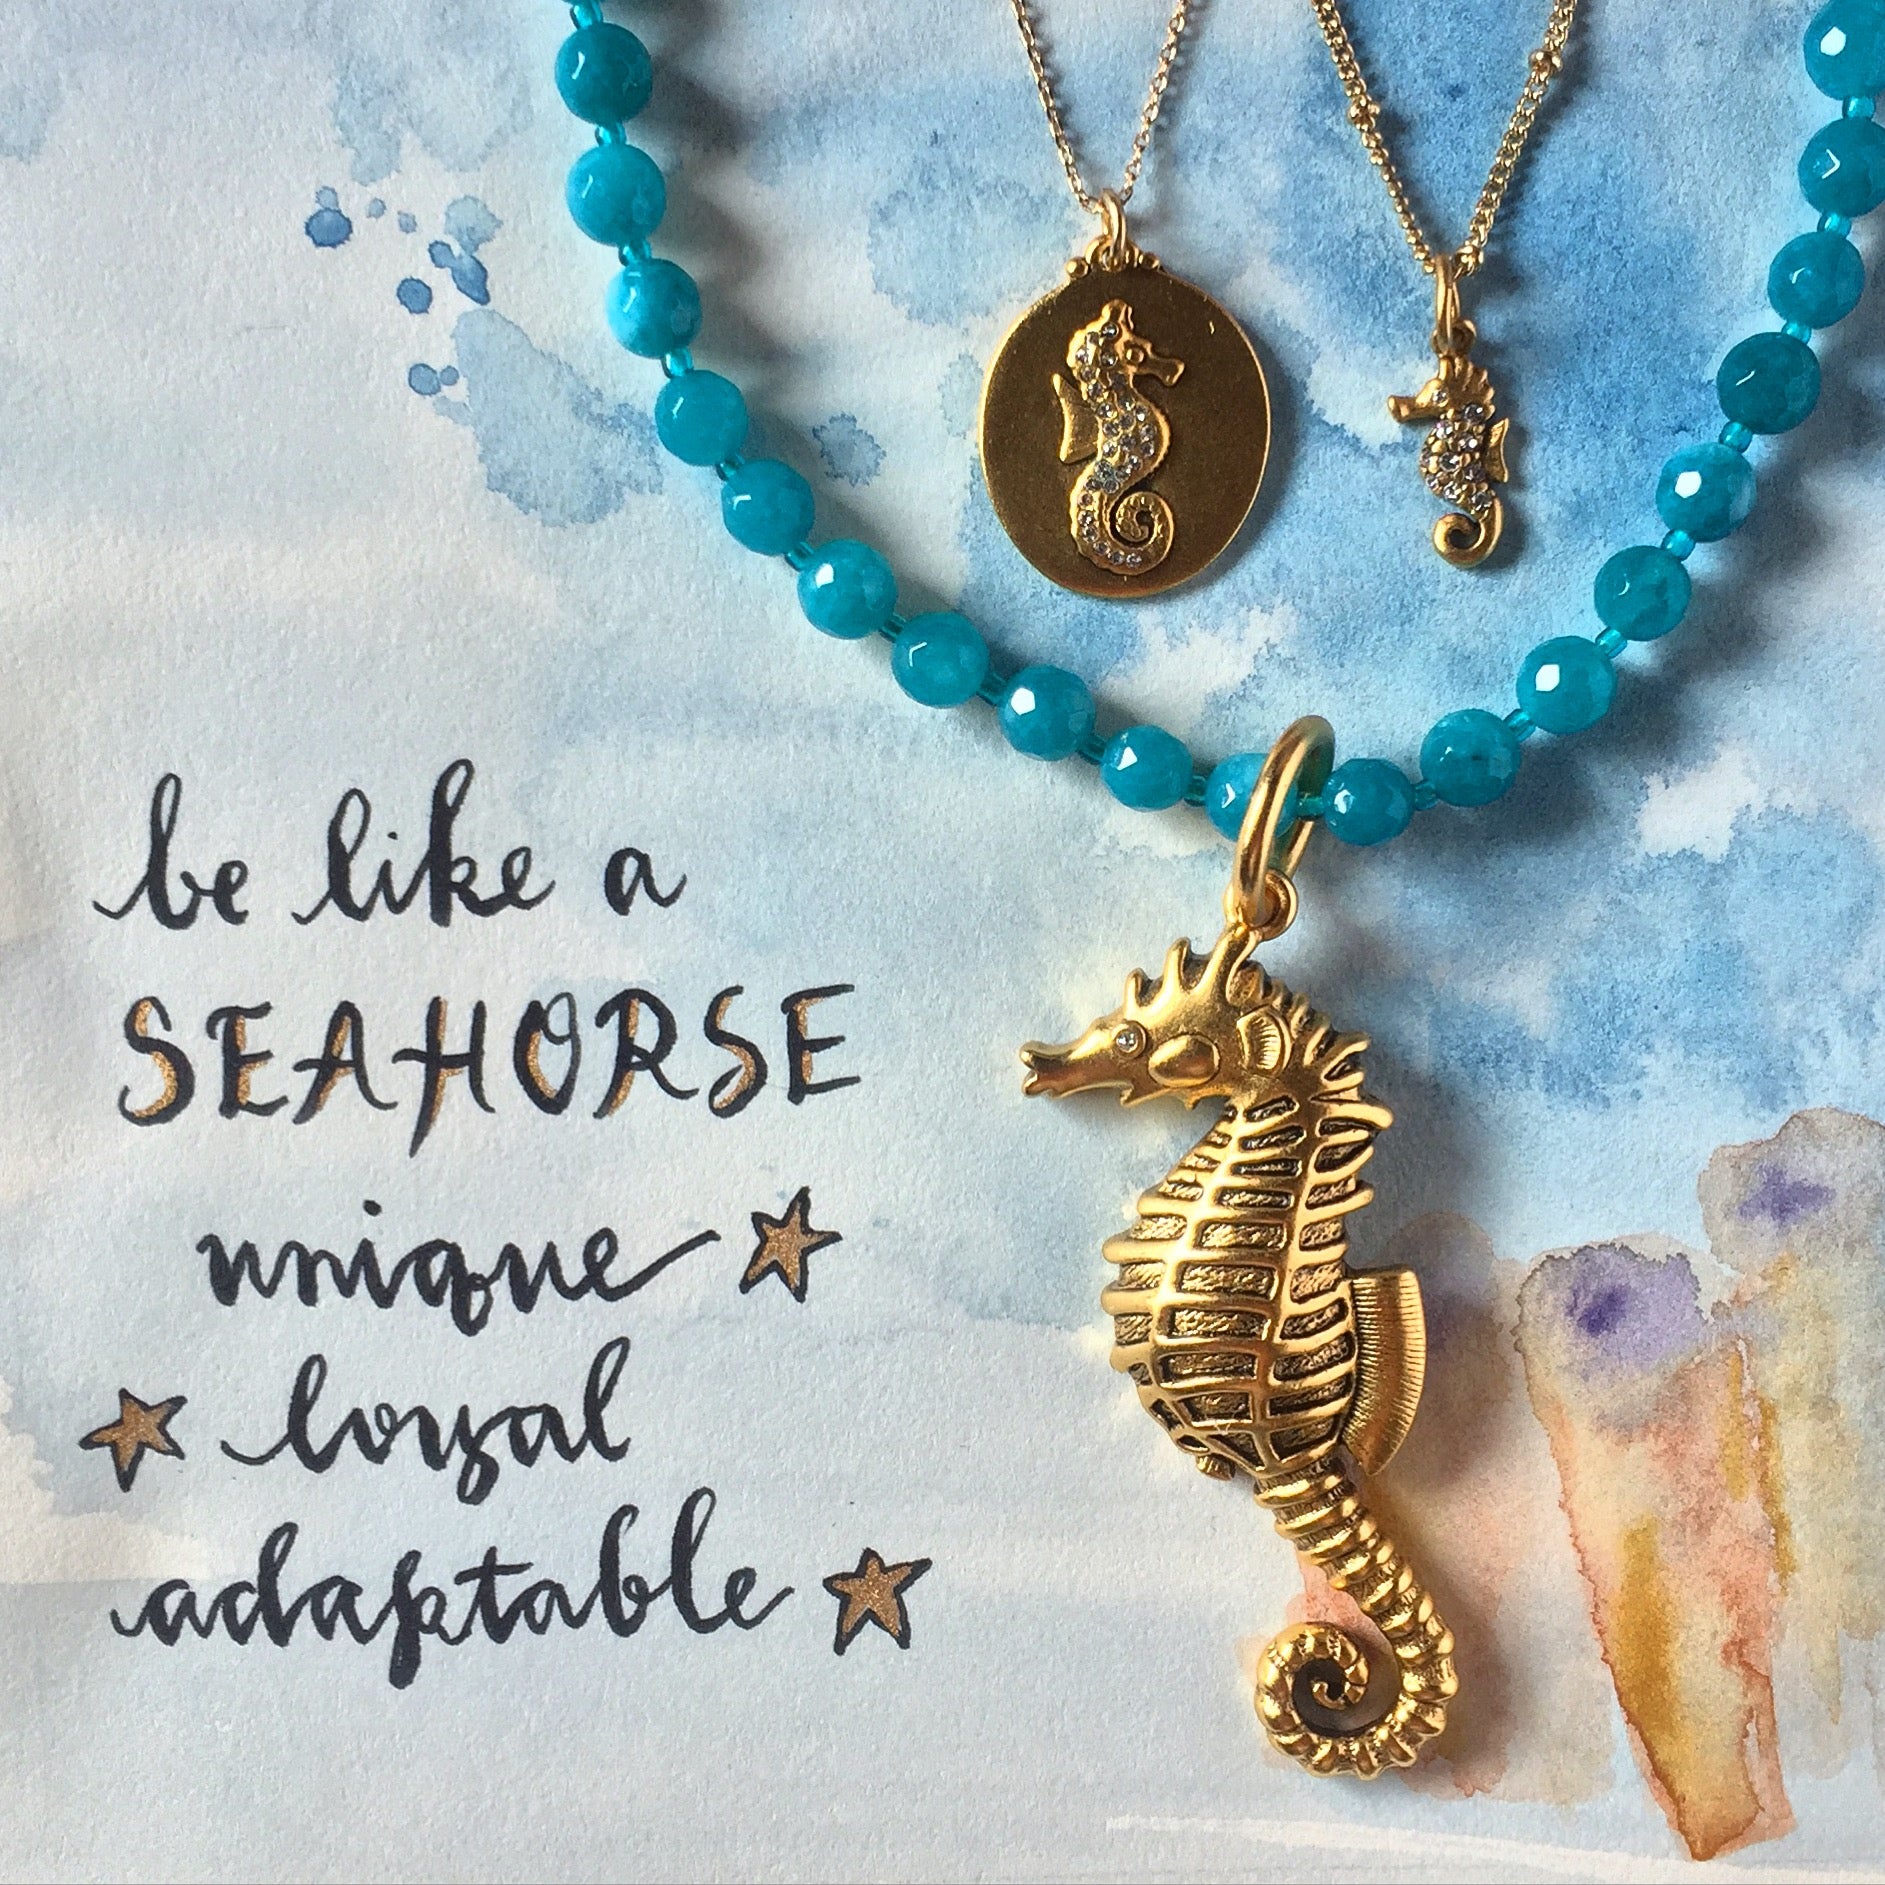 #SequinSayings - Be Like a Seahorse